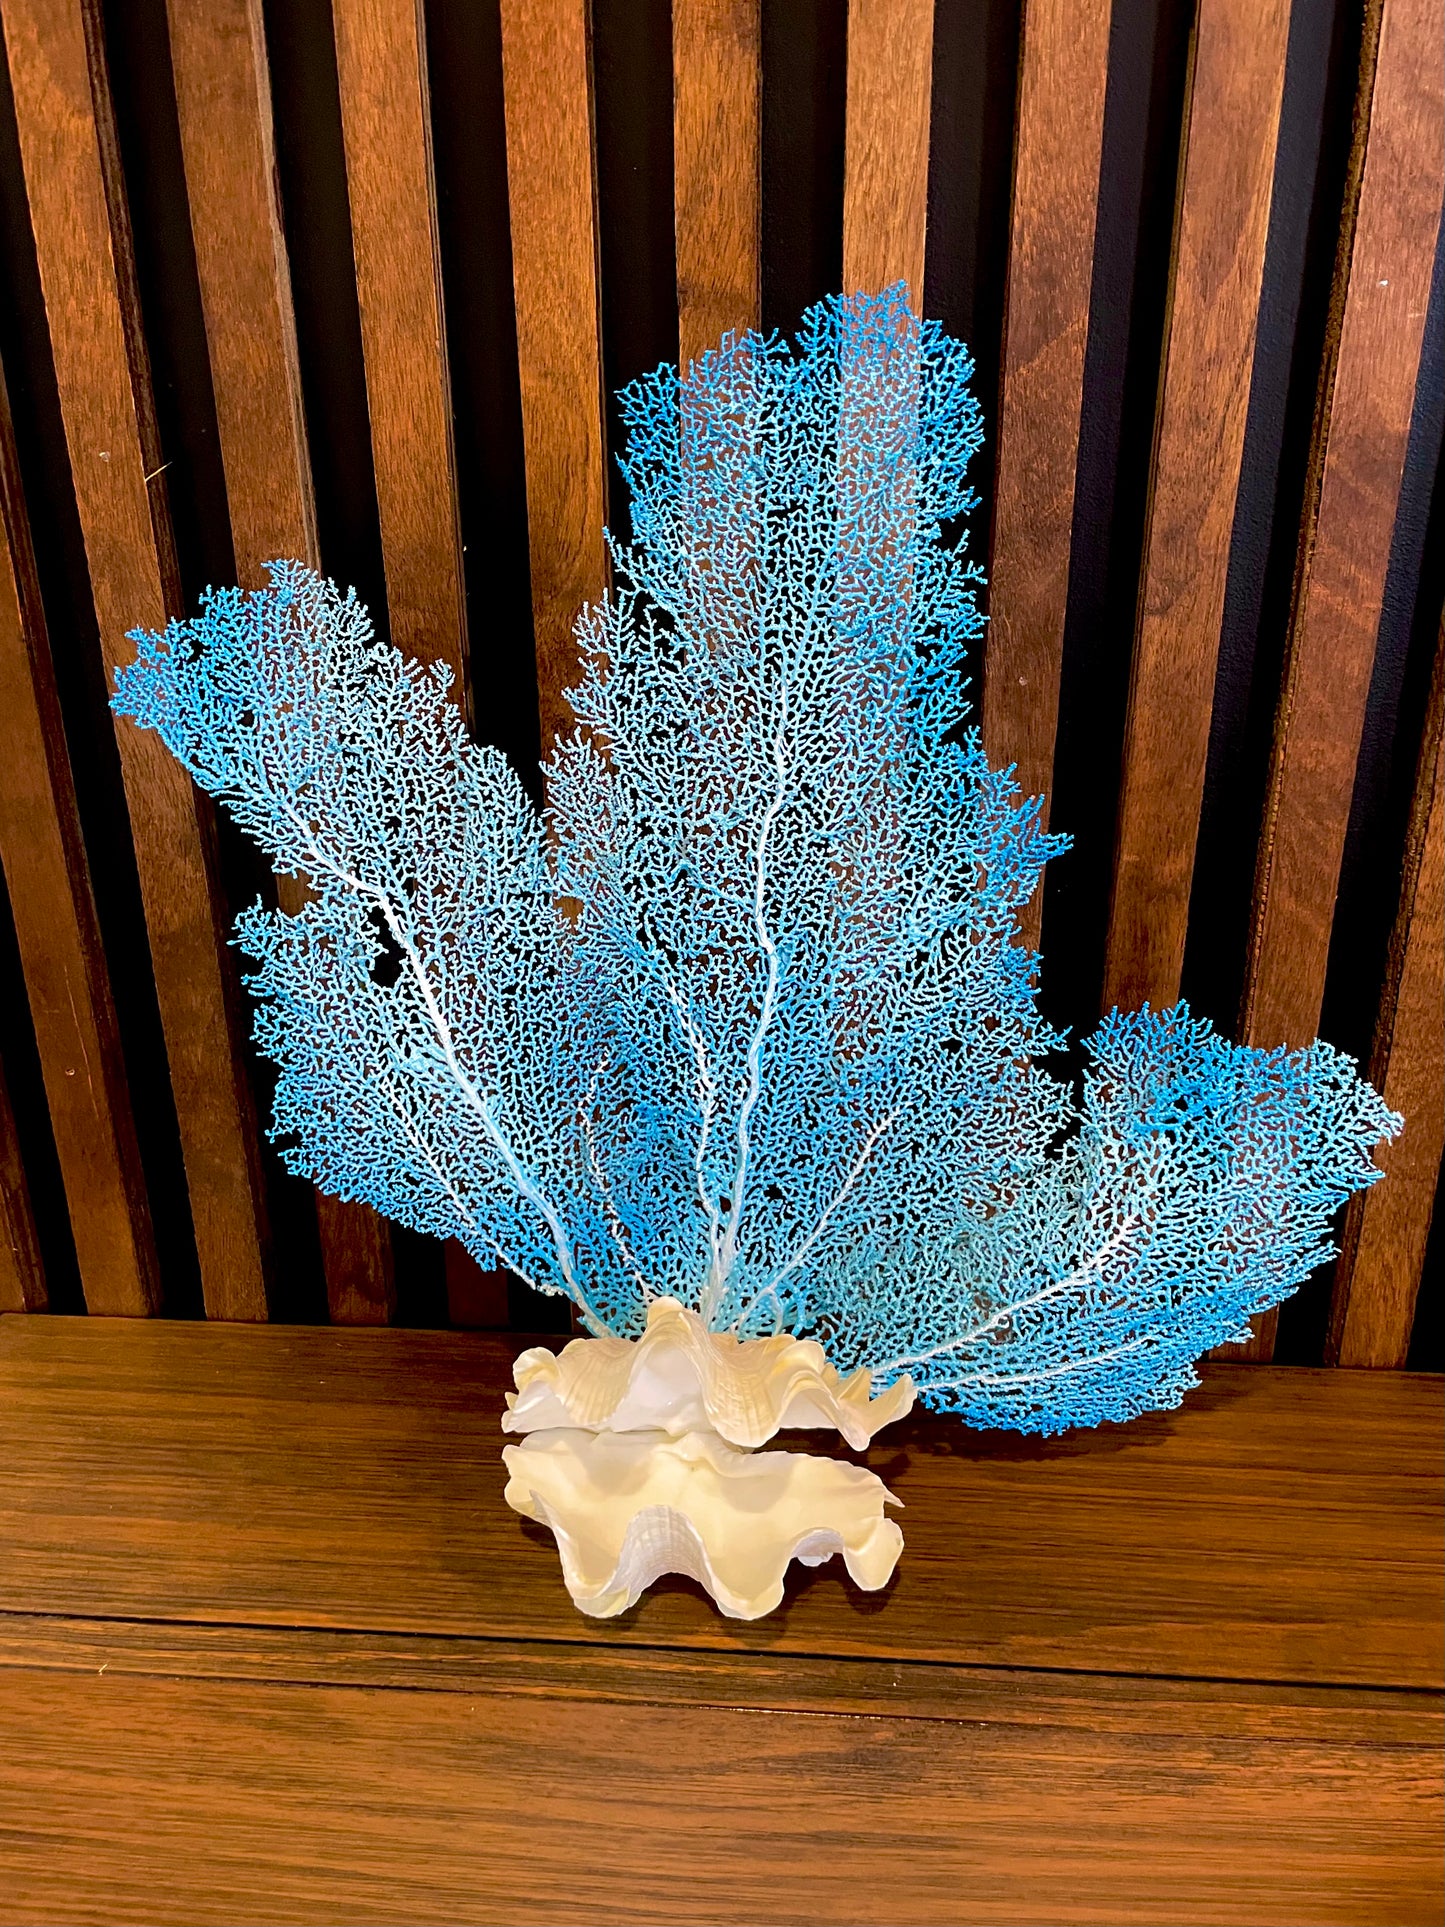 Fluted Giant Clam (6”) and Sea Fan Sculpture (17”)